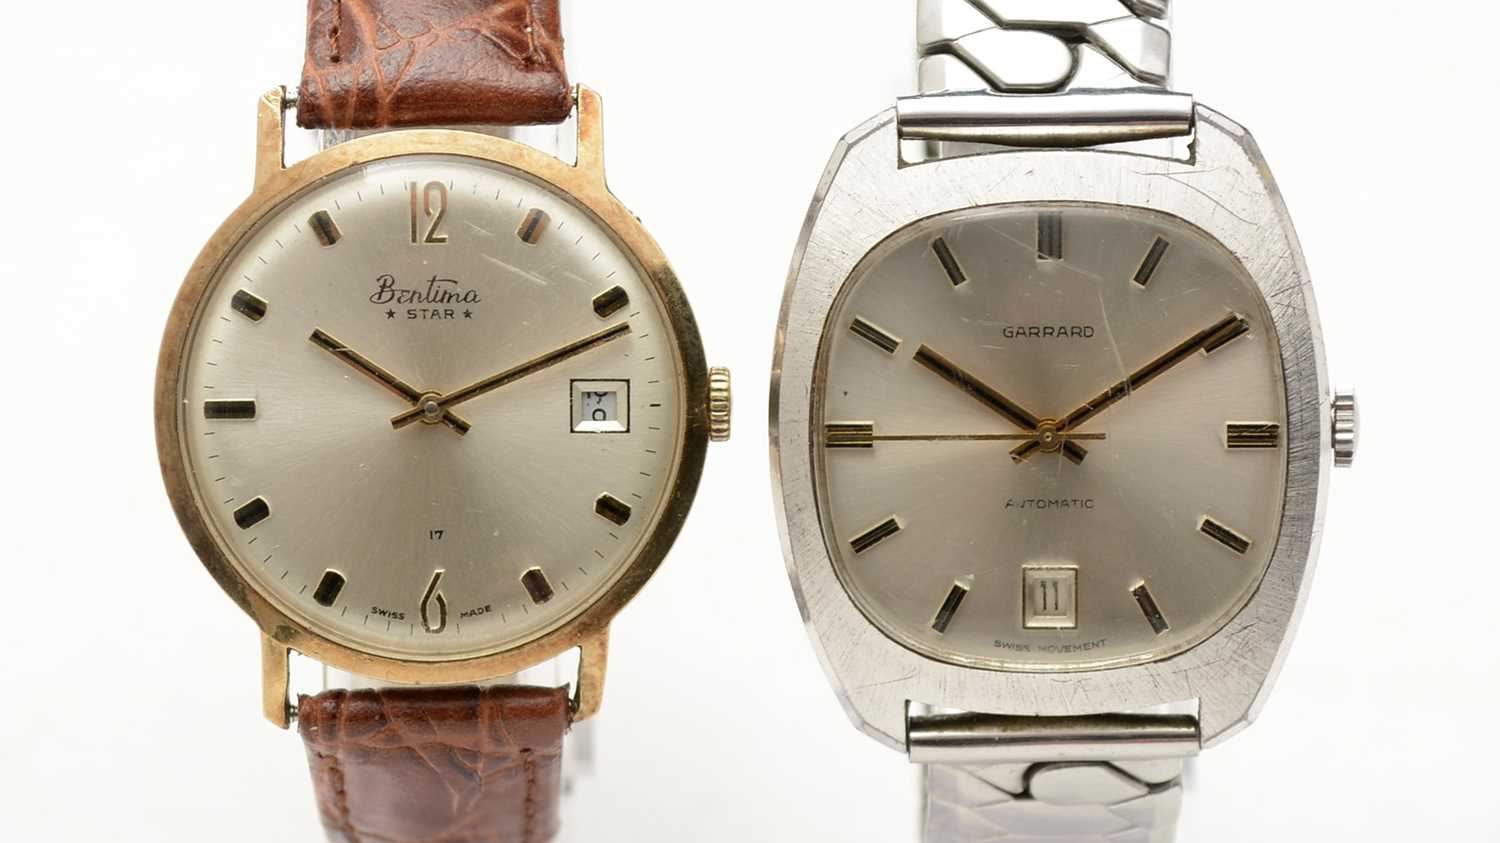 A gold watch by Bentina and a silver watch by Garrard